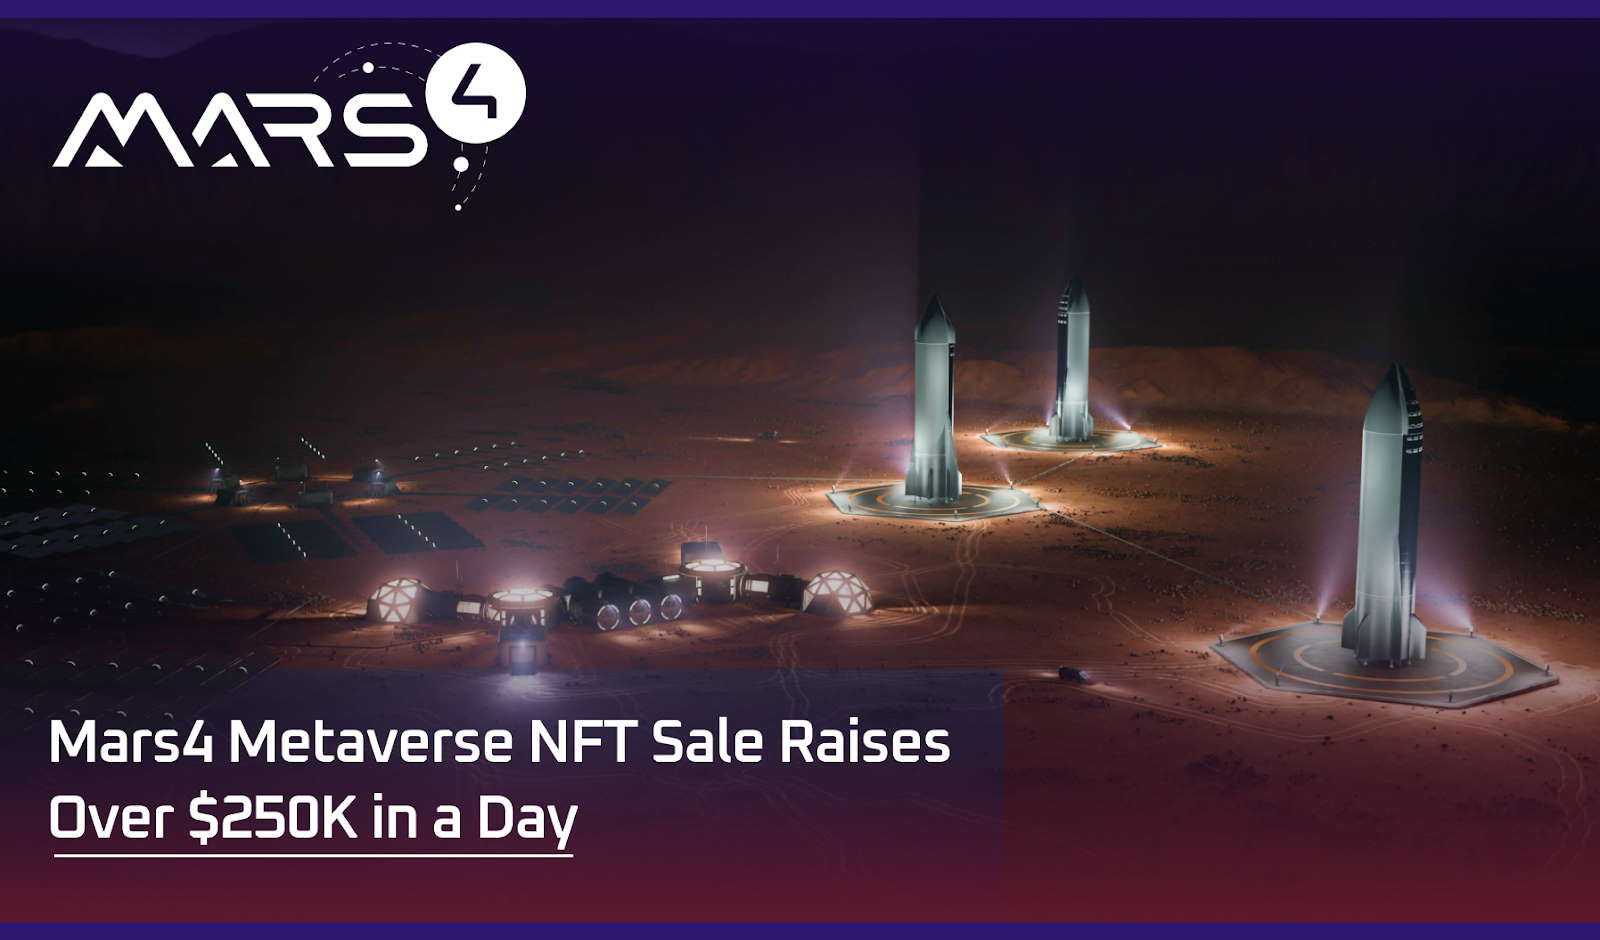 Mars4 Metaverse NFT Sale Raises Over $250K in a Day: The World’s First Virtua...